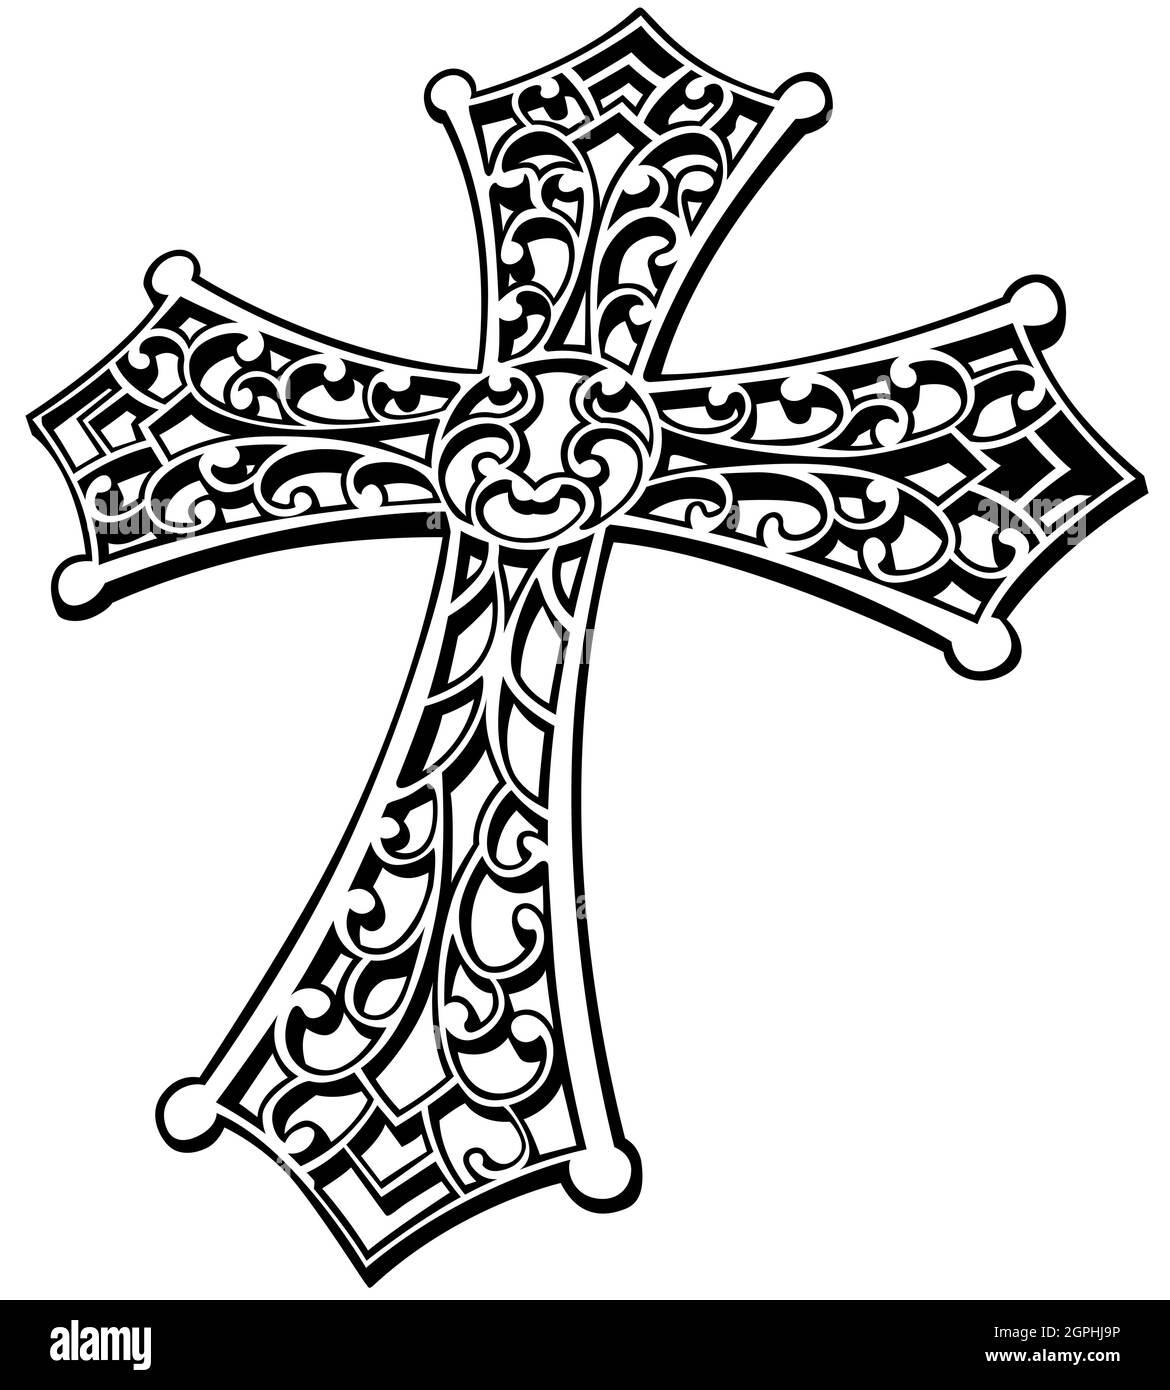 Black and White Carved Religious Cross Stock Vector